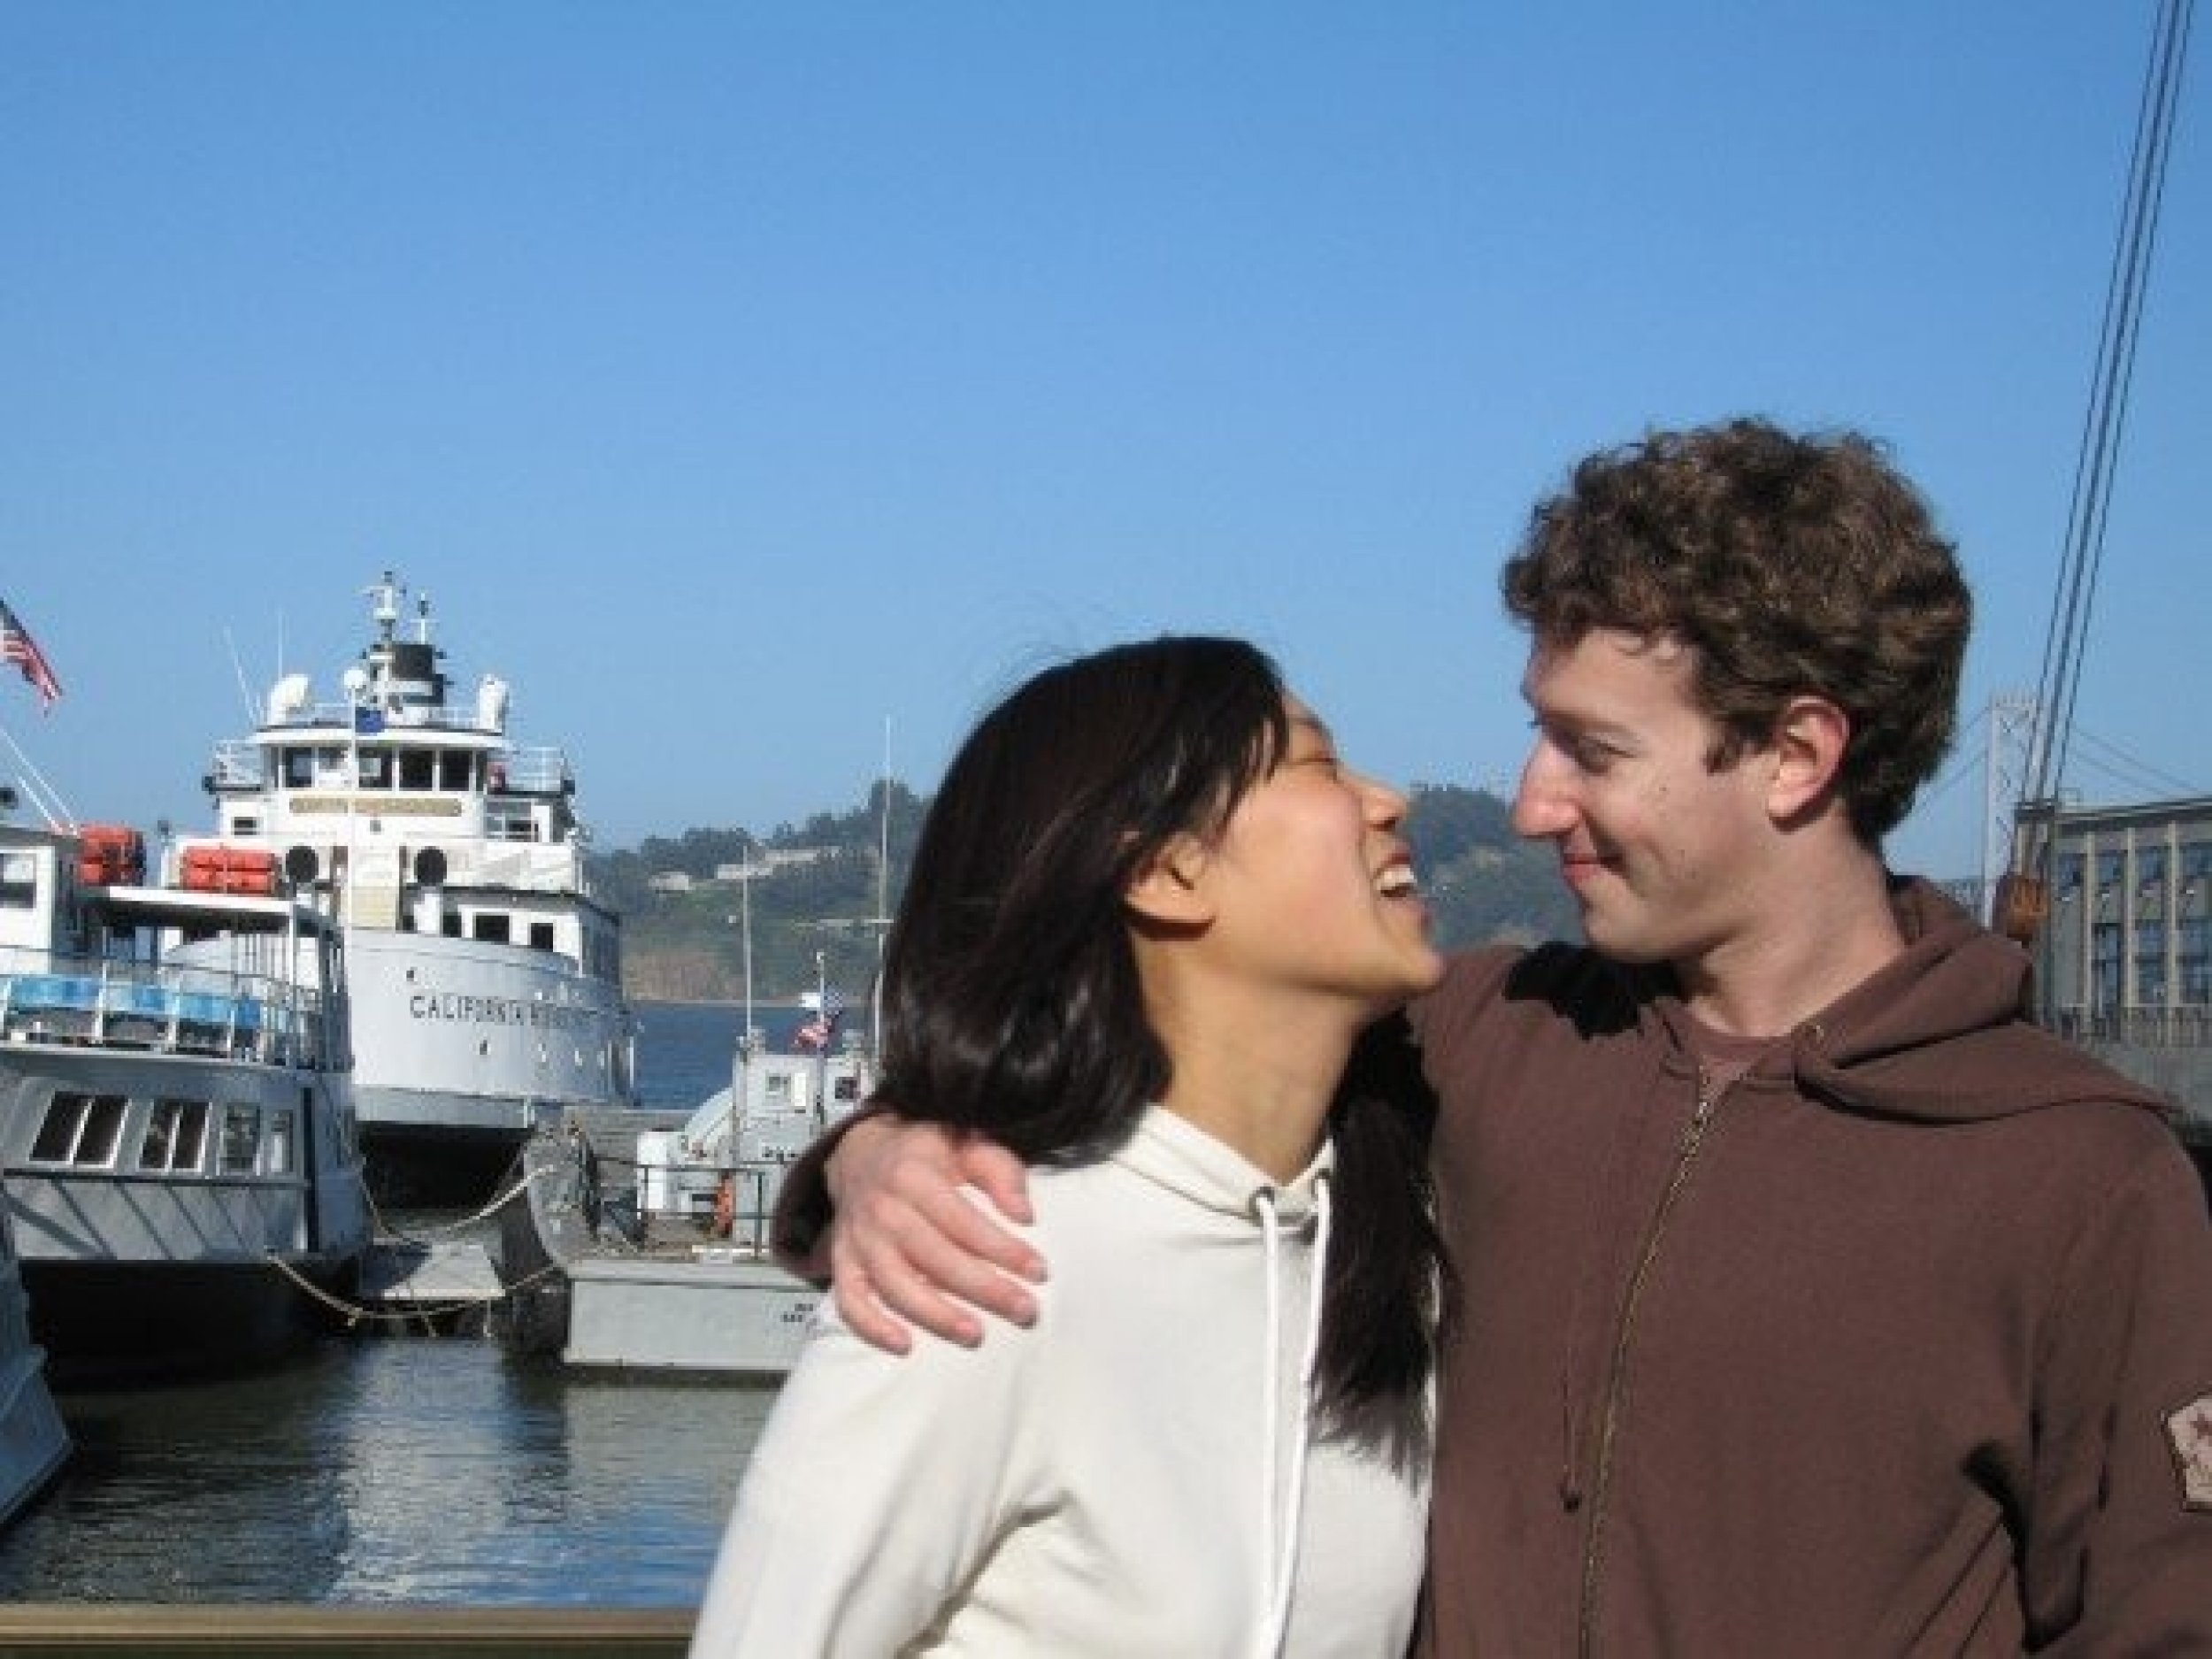 Mark Zuckerberg  married his longtime girlfriend Priscilla Chan at a small ceremony in their backyard Saturday